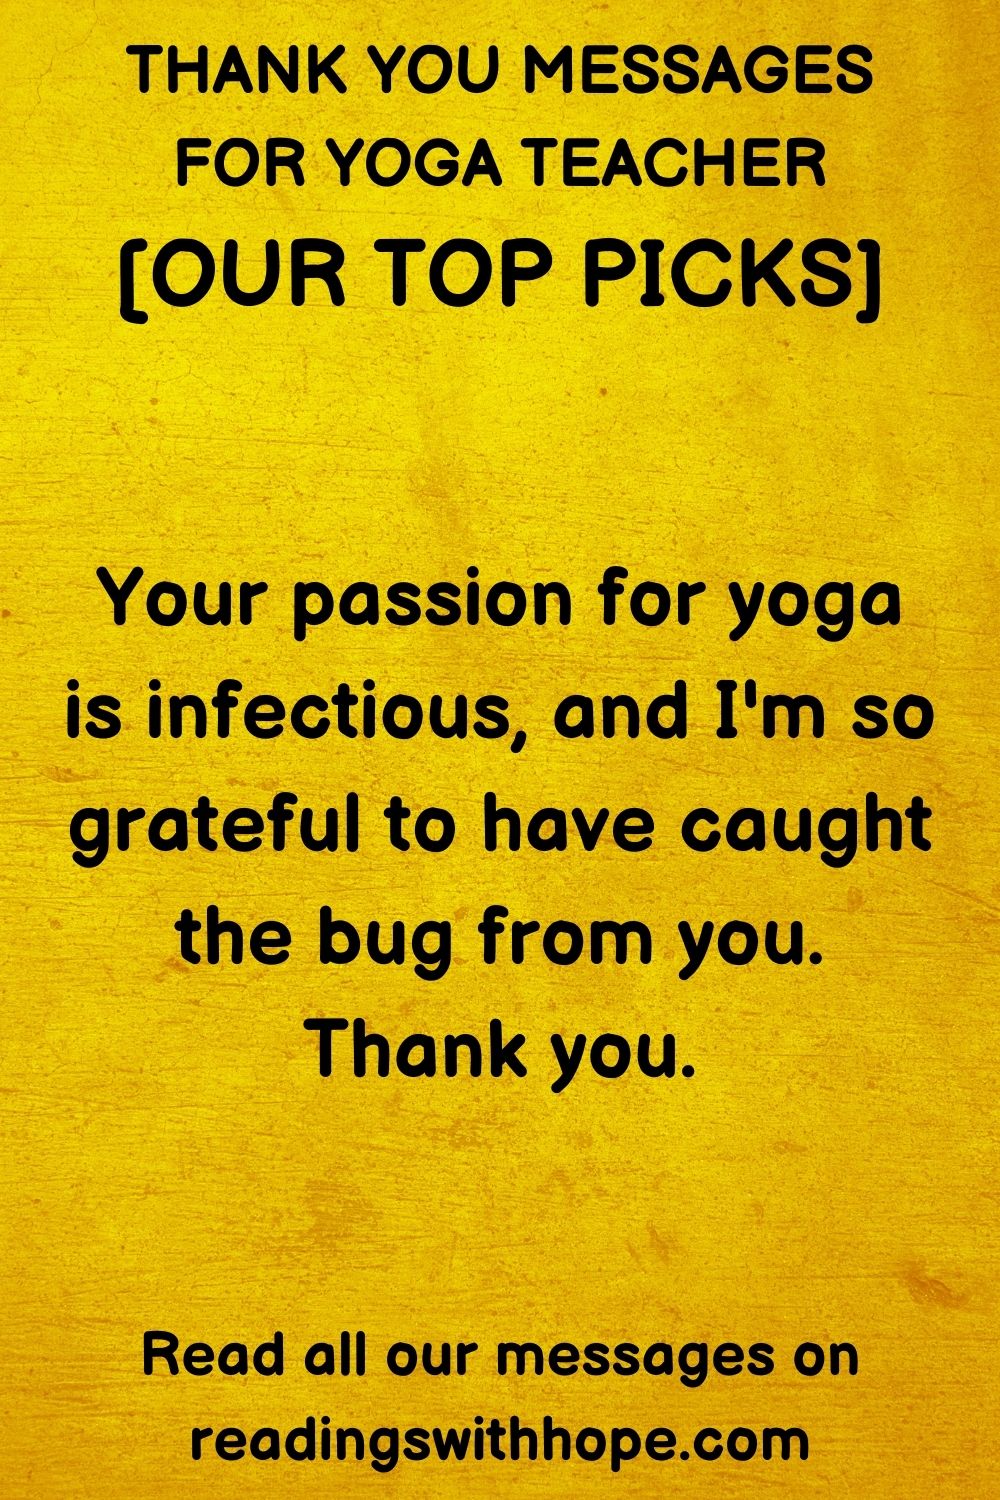 thank you note for yoga teacher that says Your passion for yoga is infectious, and I'm so grateful to have caught the bug from you. Thank you.